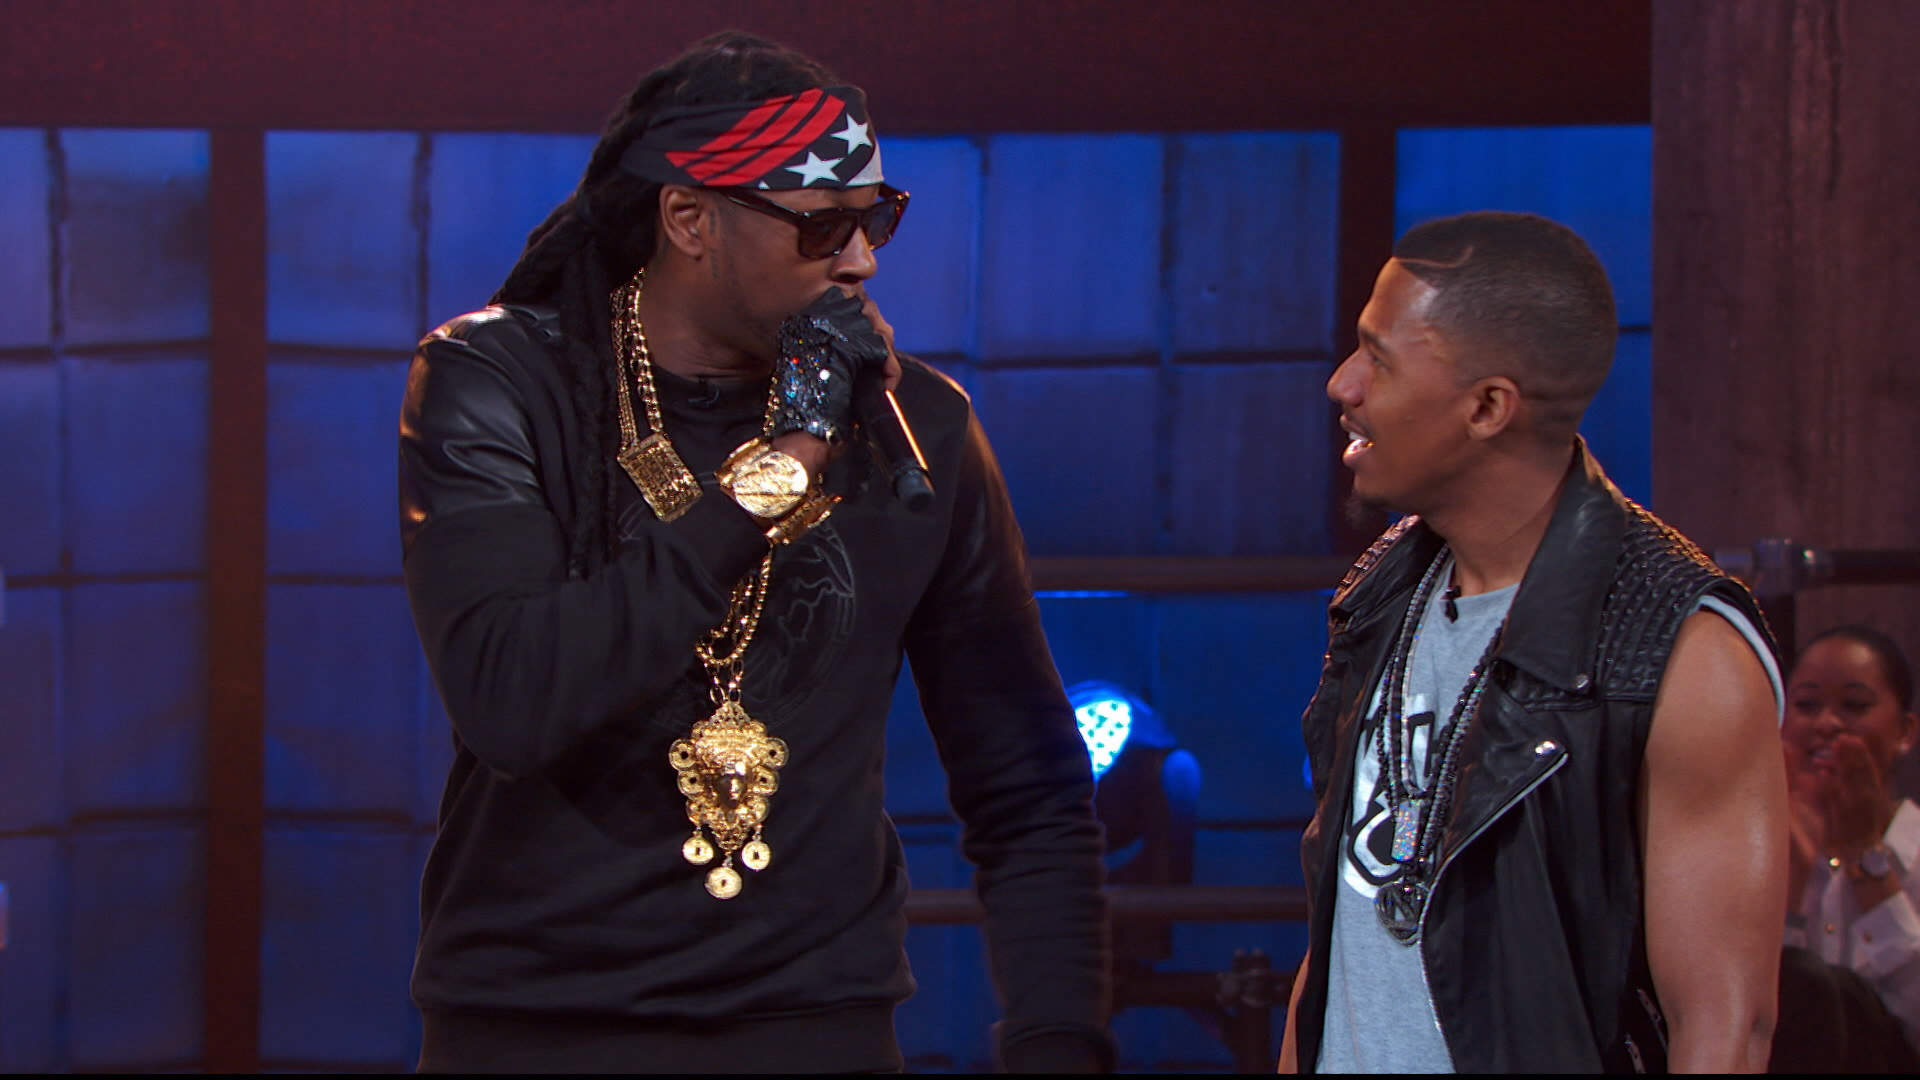 DefJam - 2 Chainz pulled up to Nick Cannon Presents: Wild